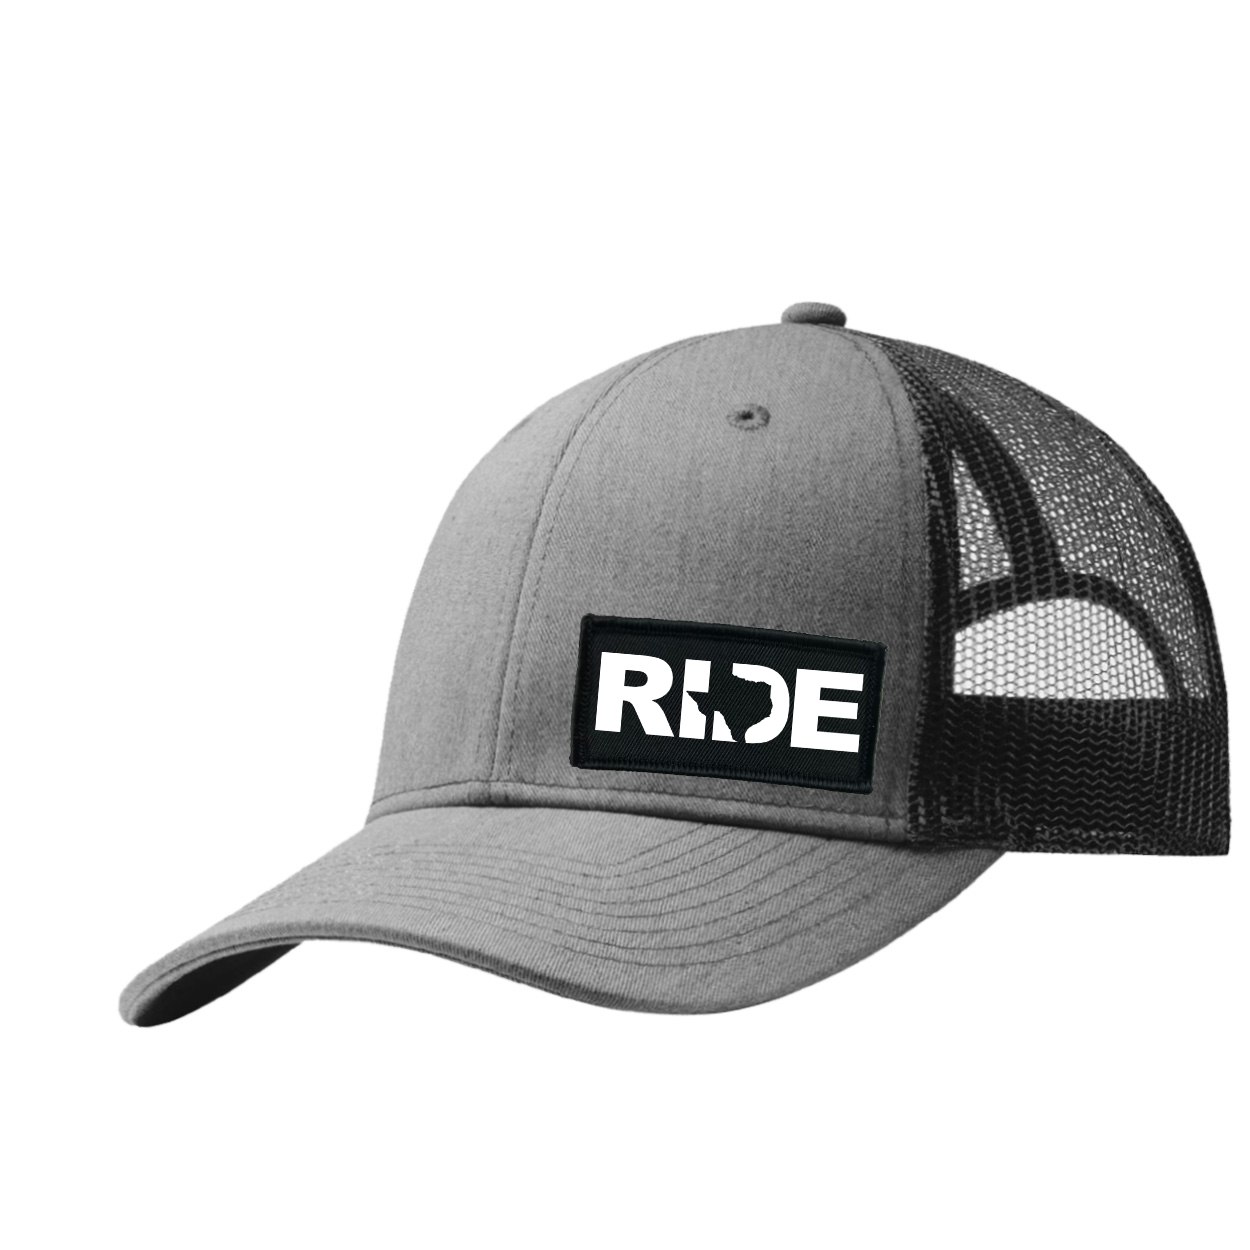 Ride Texas Night Out Woven Patch Snapback Trucker Hat Heather Gray/Black (White Logo)